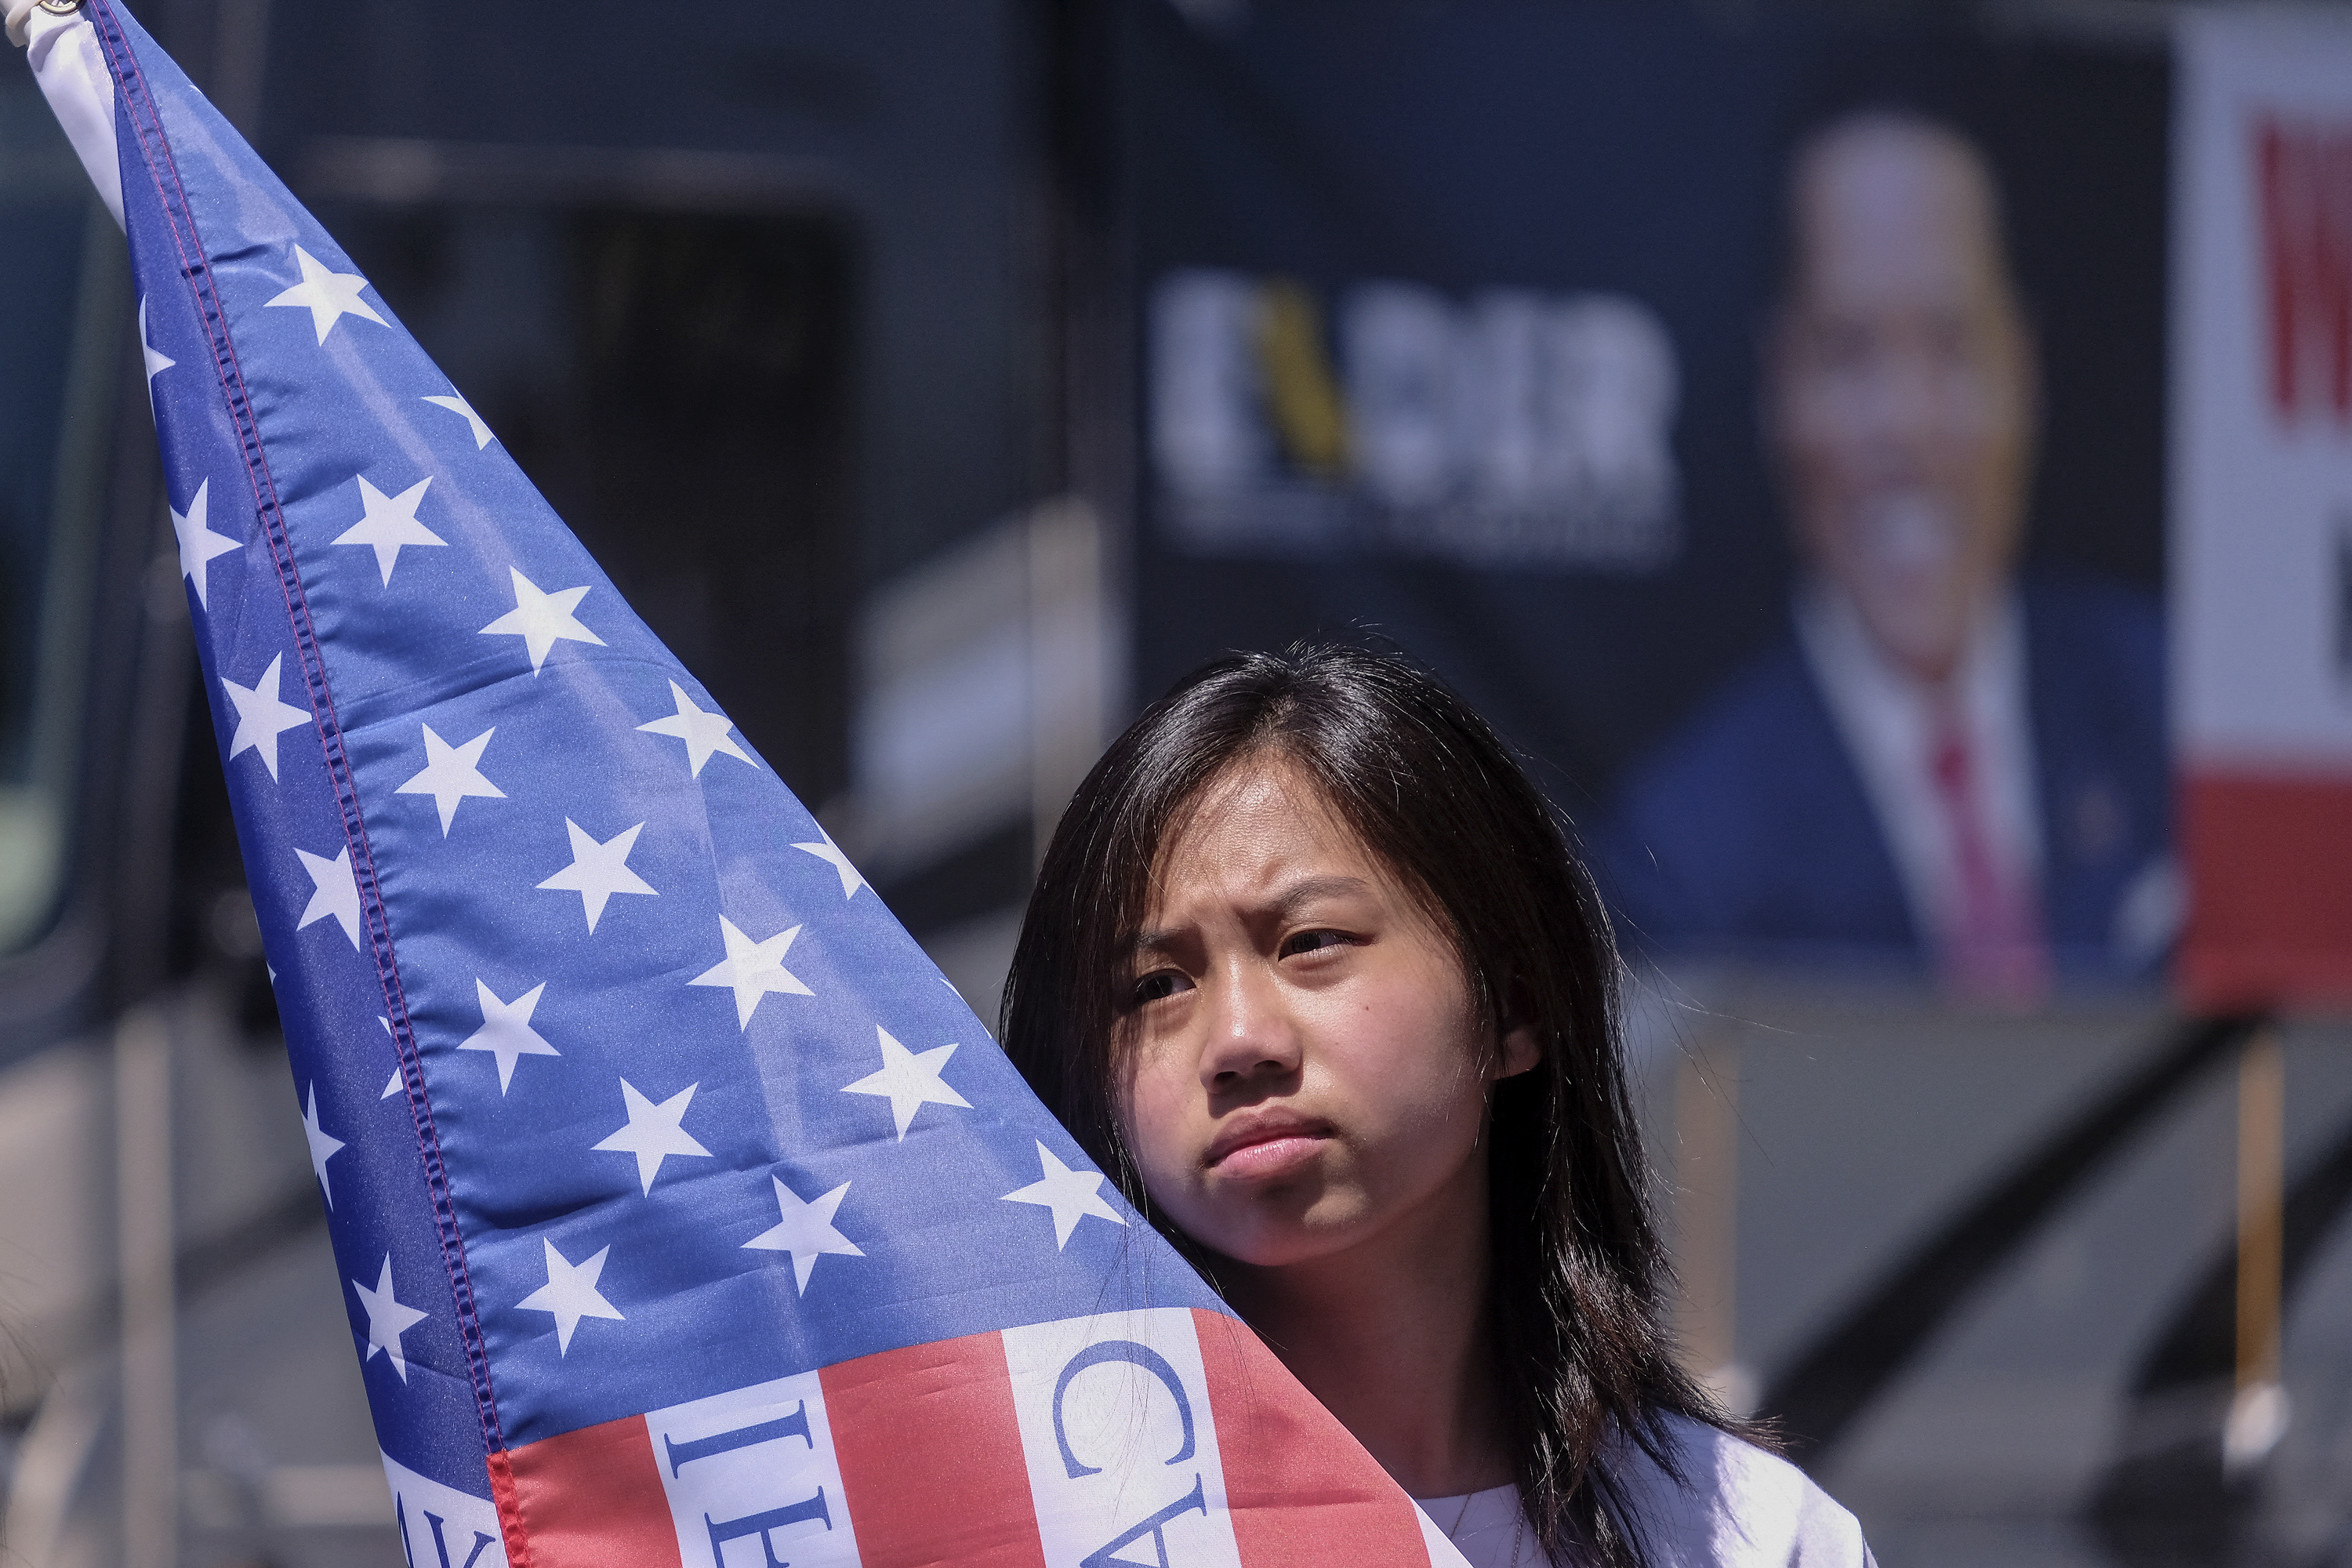 A young woman stands in front of a blurred banner with an American flag partially obscuring her face.